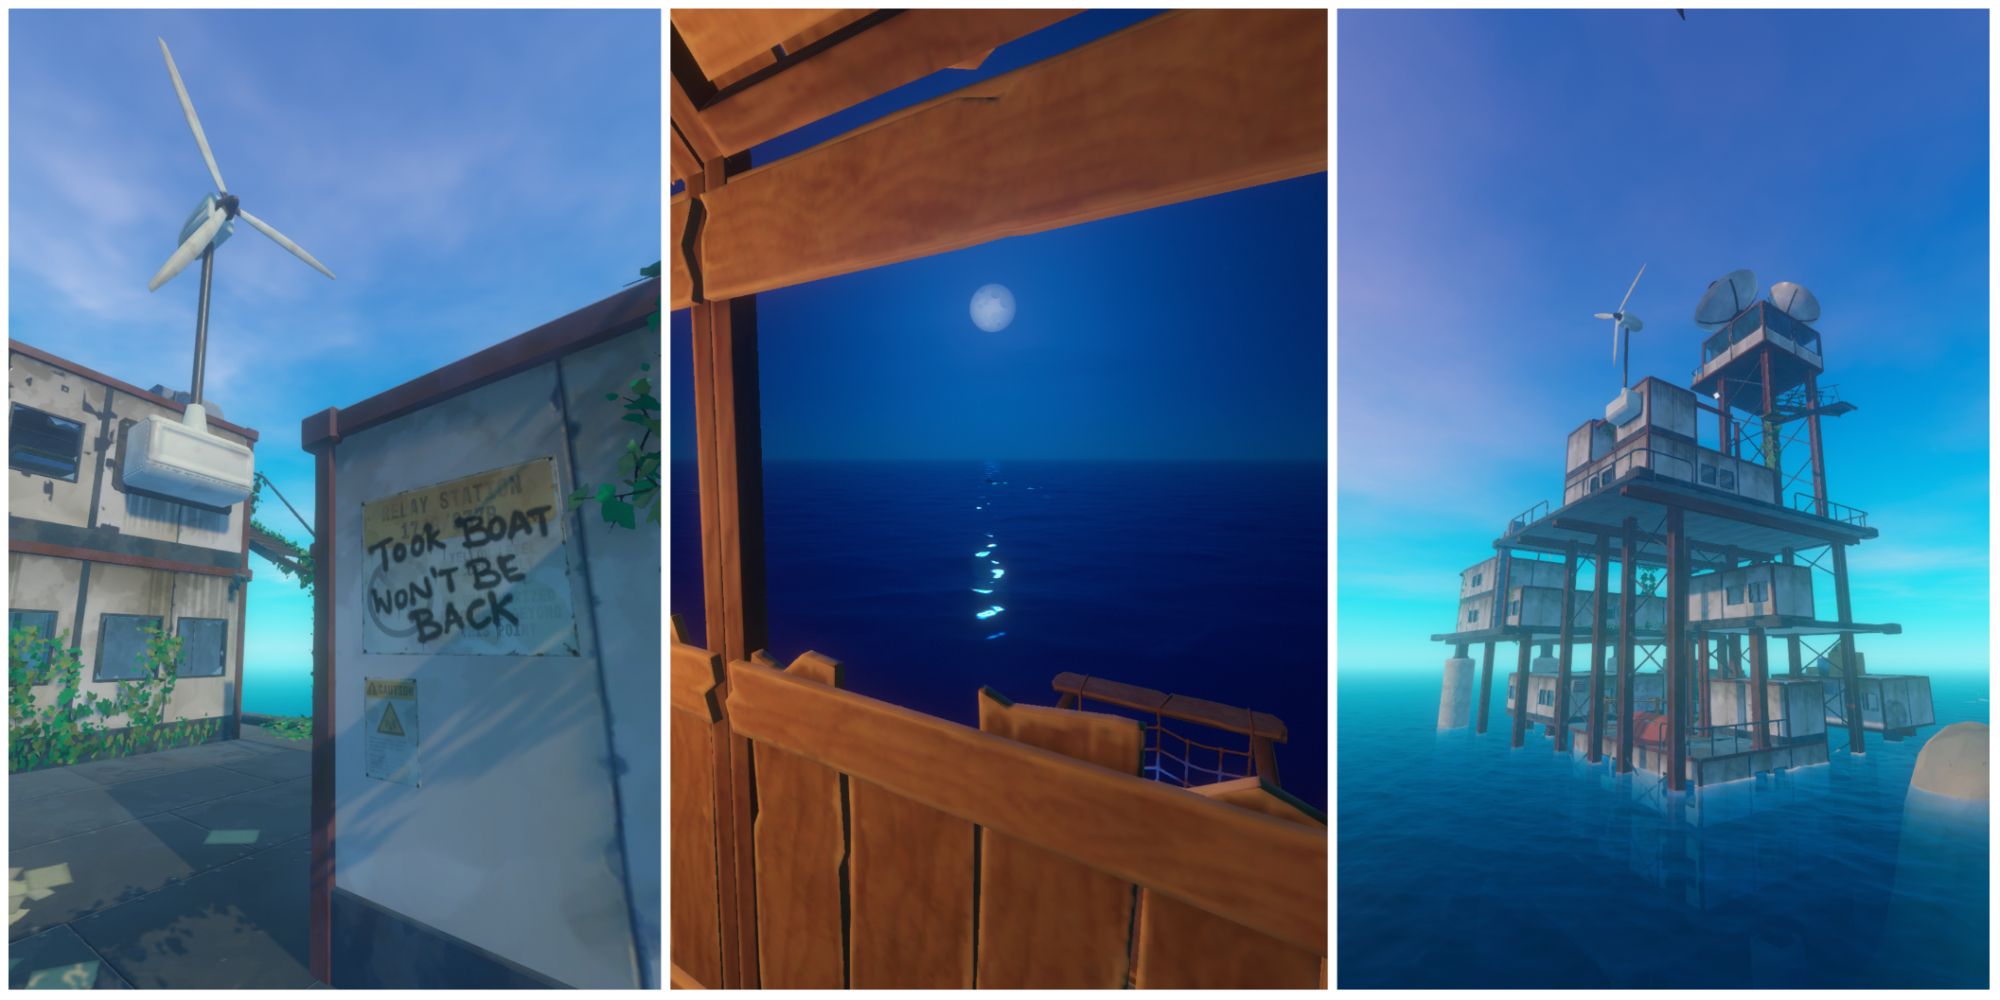 Three Images From The Game Raft: A Written Message, A View From A Window Of The Moon And A Radio Tower At Sea